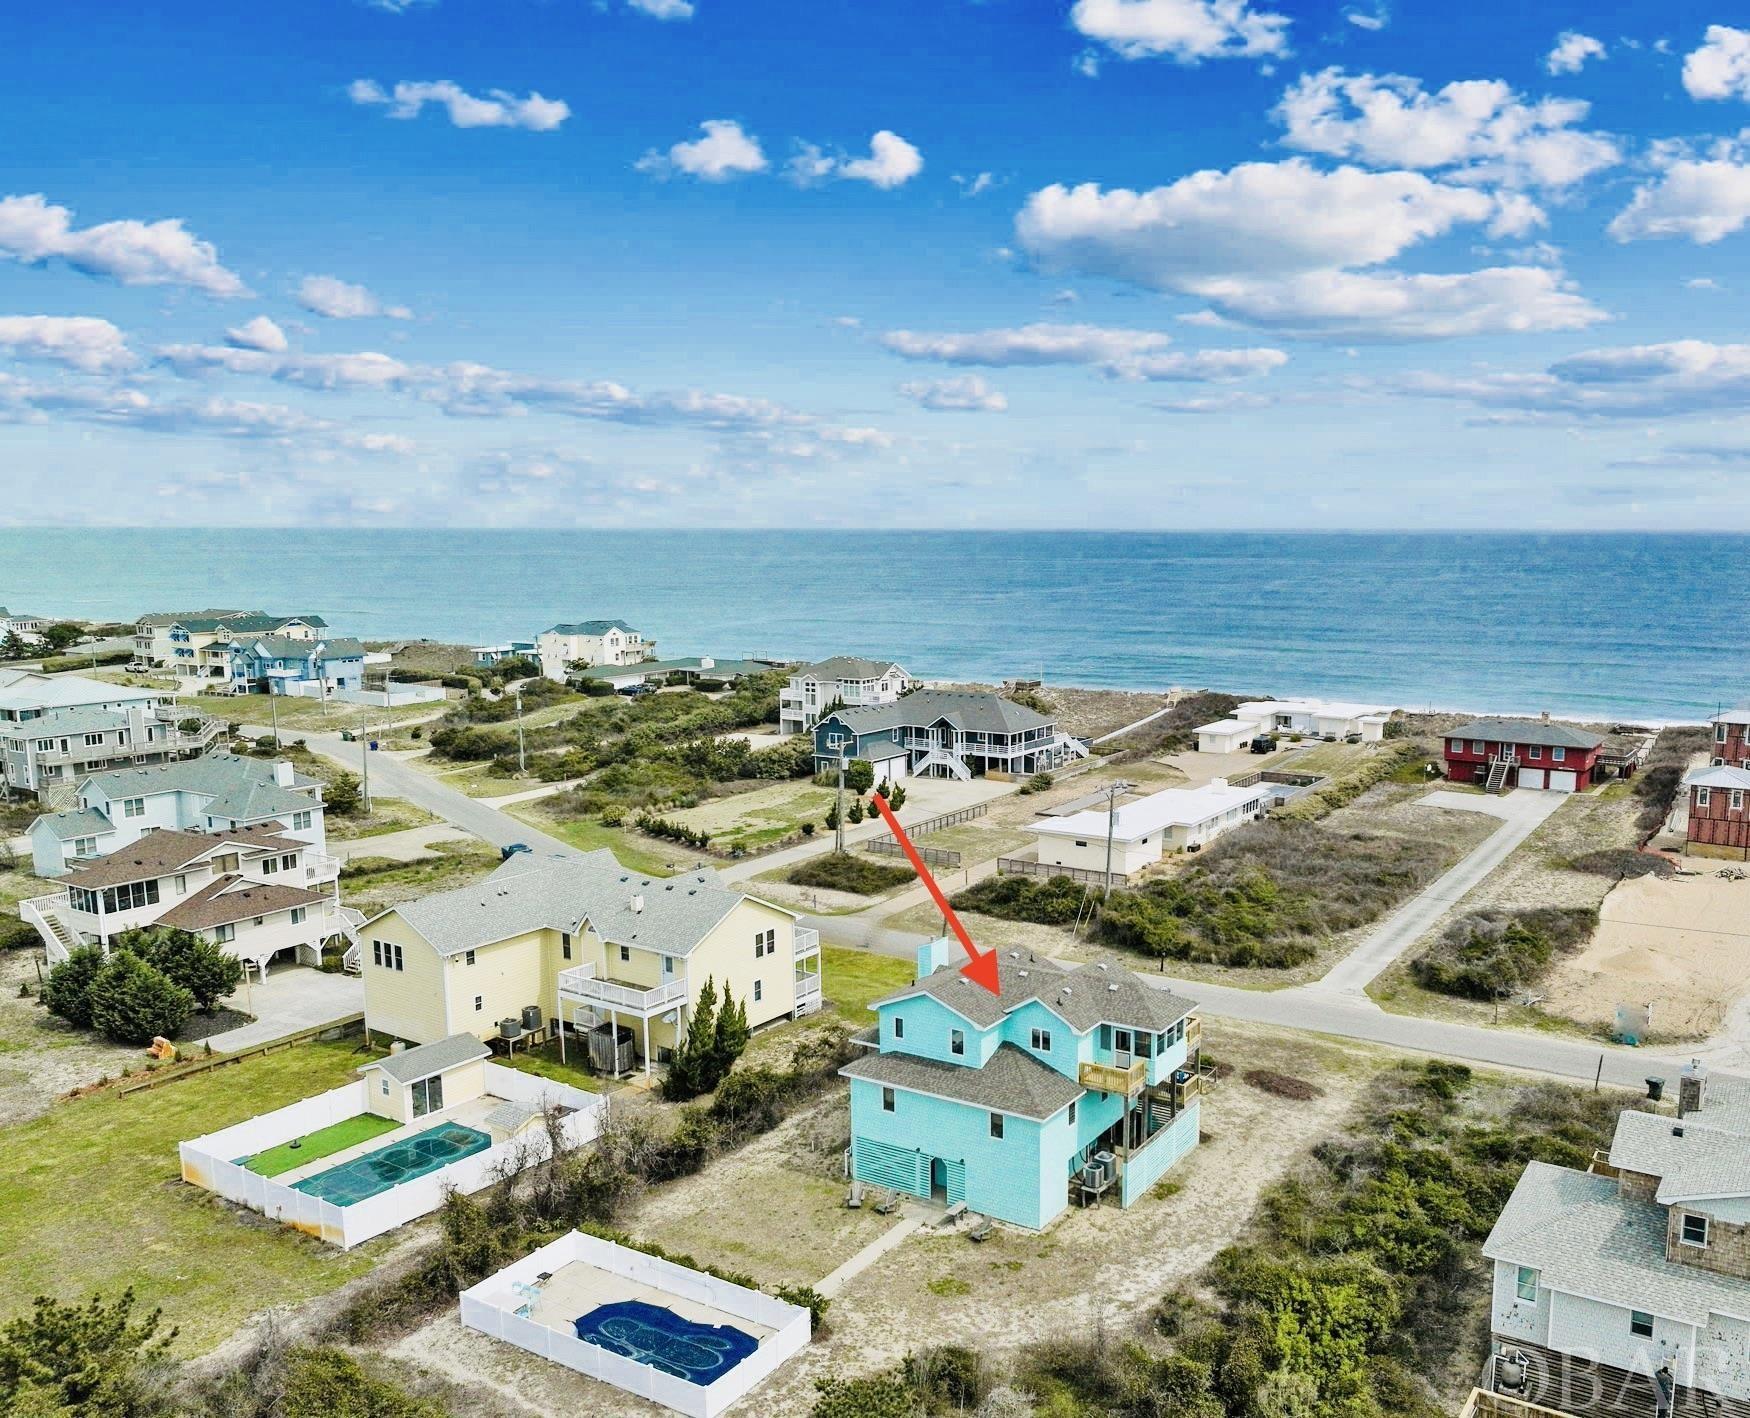 This beautiful well maintained semi-oceanfront home is tucked away on a quiet street, just a few steps away from two separate beach accesses. This sought after Southern Shores location is away from the hustle and bustle, yet only minutes from restaurants, shops, movies, golf and so much more. The upper level of this home features an open concept design with a fully updated kitchen with plenty of bar seating, two dining areas, great room with gas fireplace, vaulted ceilings and direct access to an east facing sun deck and screened-in porch - the perfect place to take in the stunning ocean views. The covered deck below is yet another great spot to enjoy the outdoors and ocean breeze. On this mid-level you will also find a laundry closet, four spacious bedrooms (one en-suite) and an additional full bath. All new LVP flooring and new paint throughout. Dry entry and enclosed storage on ground floor. Outdoor shower, fish cleaning station, outdoor pool with large sundeck for relaxing. Lots of parking! House is being sold fully furnished.